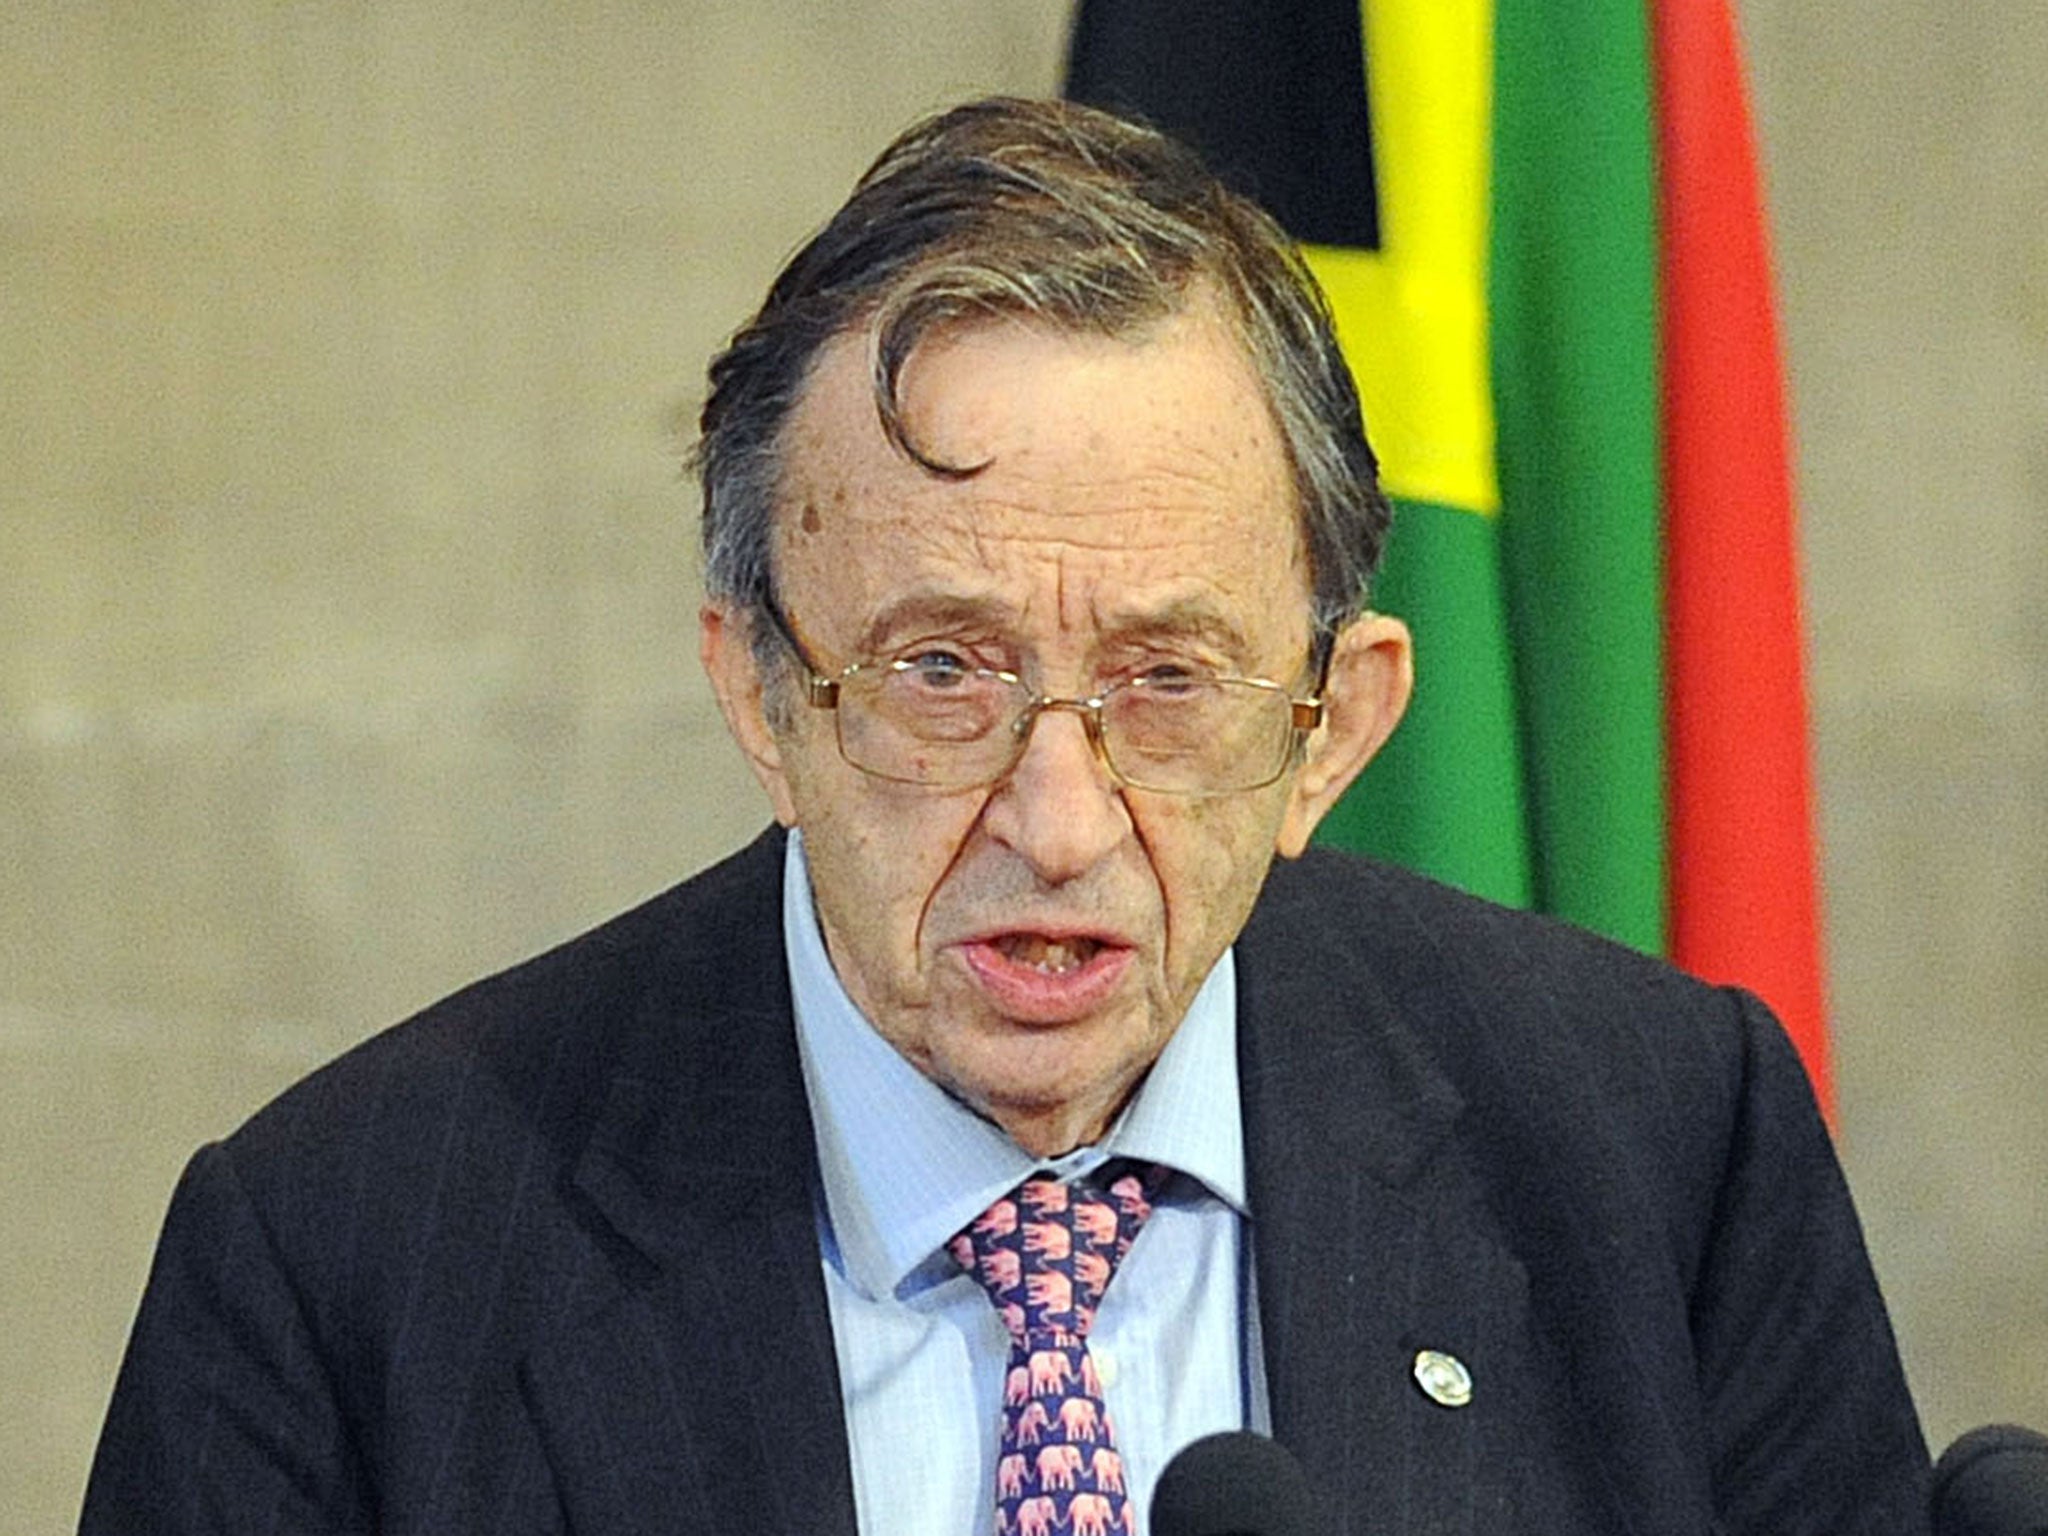 Lord Joffe, a crossbench peer, has made four attempts to change the law